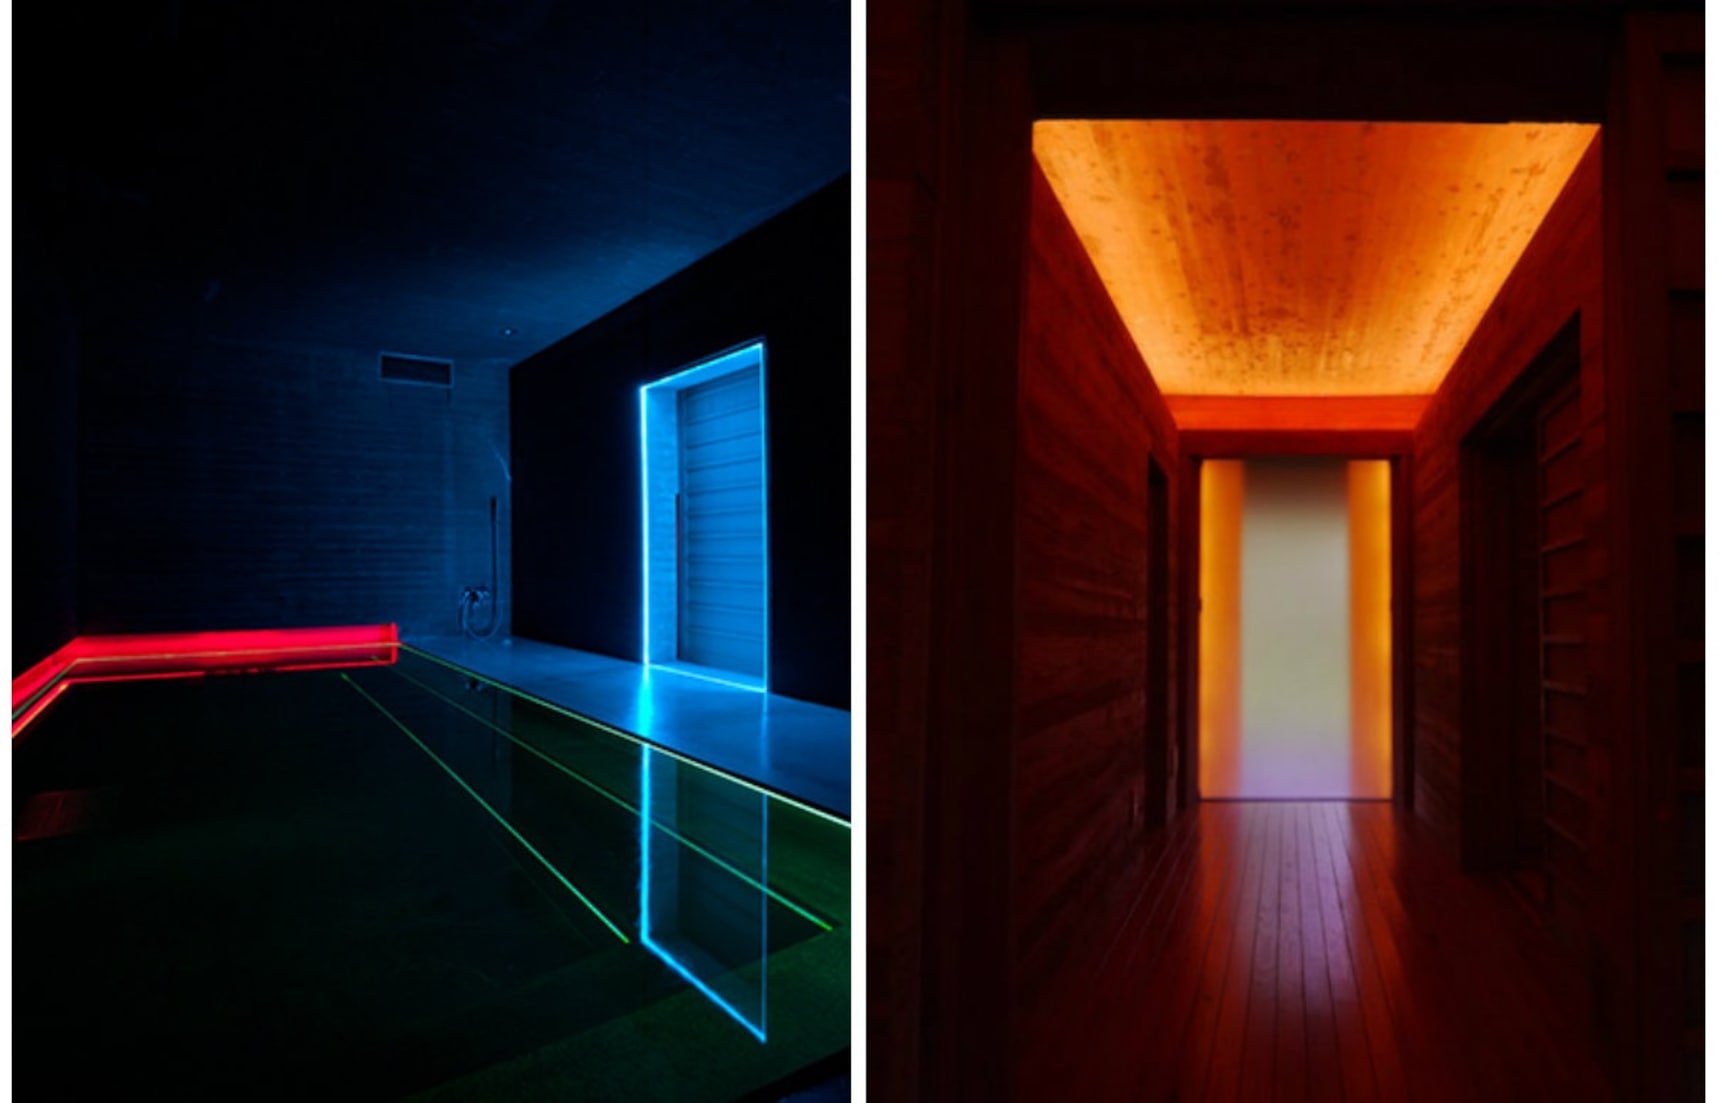 House of Light is an Absolute Delight | All About Japan